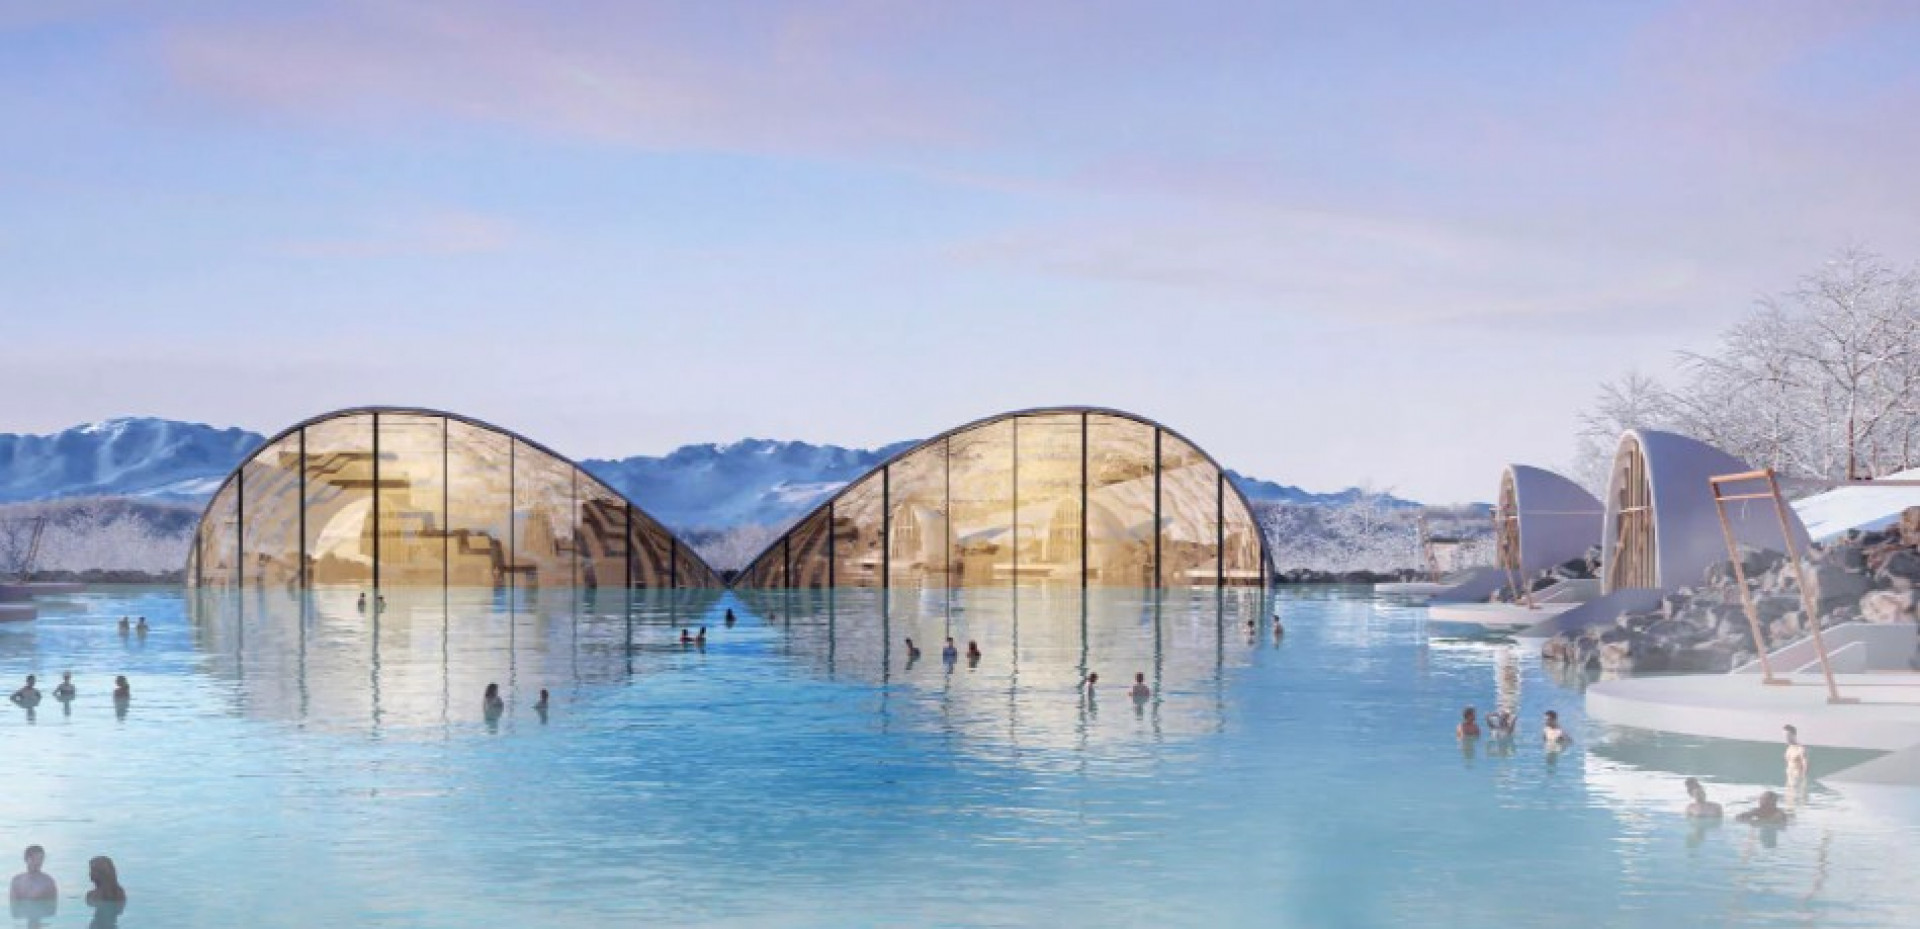 The World’s Largest Geothermal Lagoon Is Set to Be Built in Canada